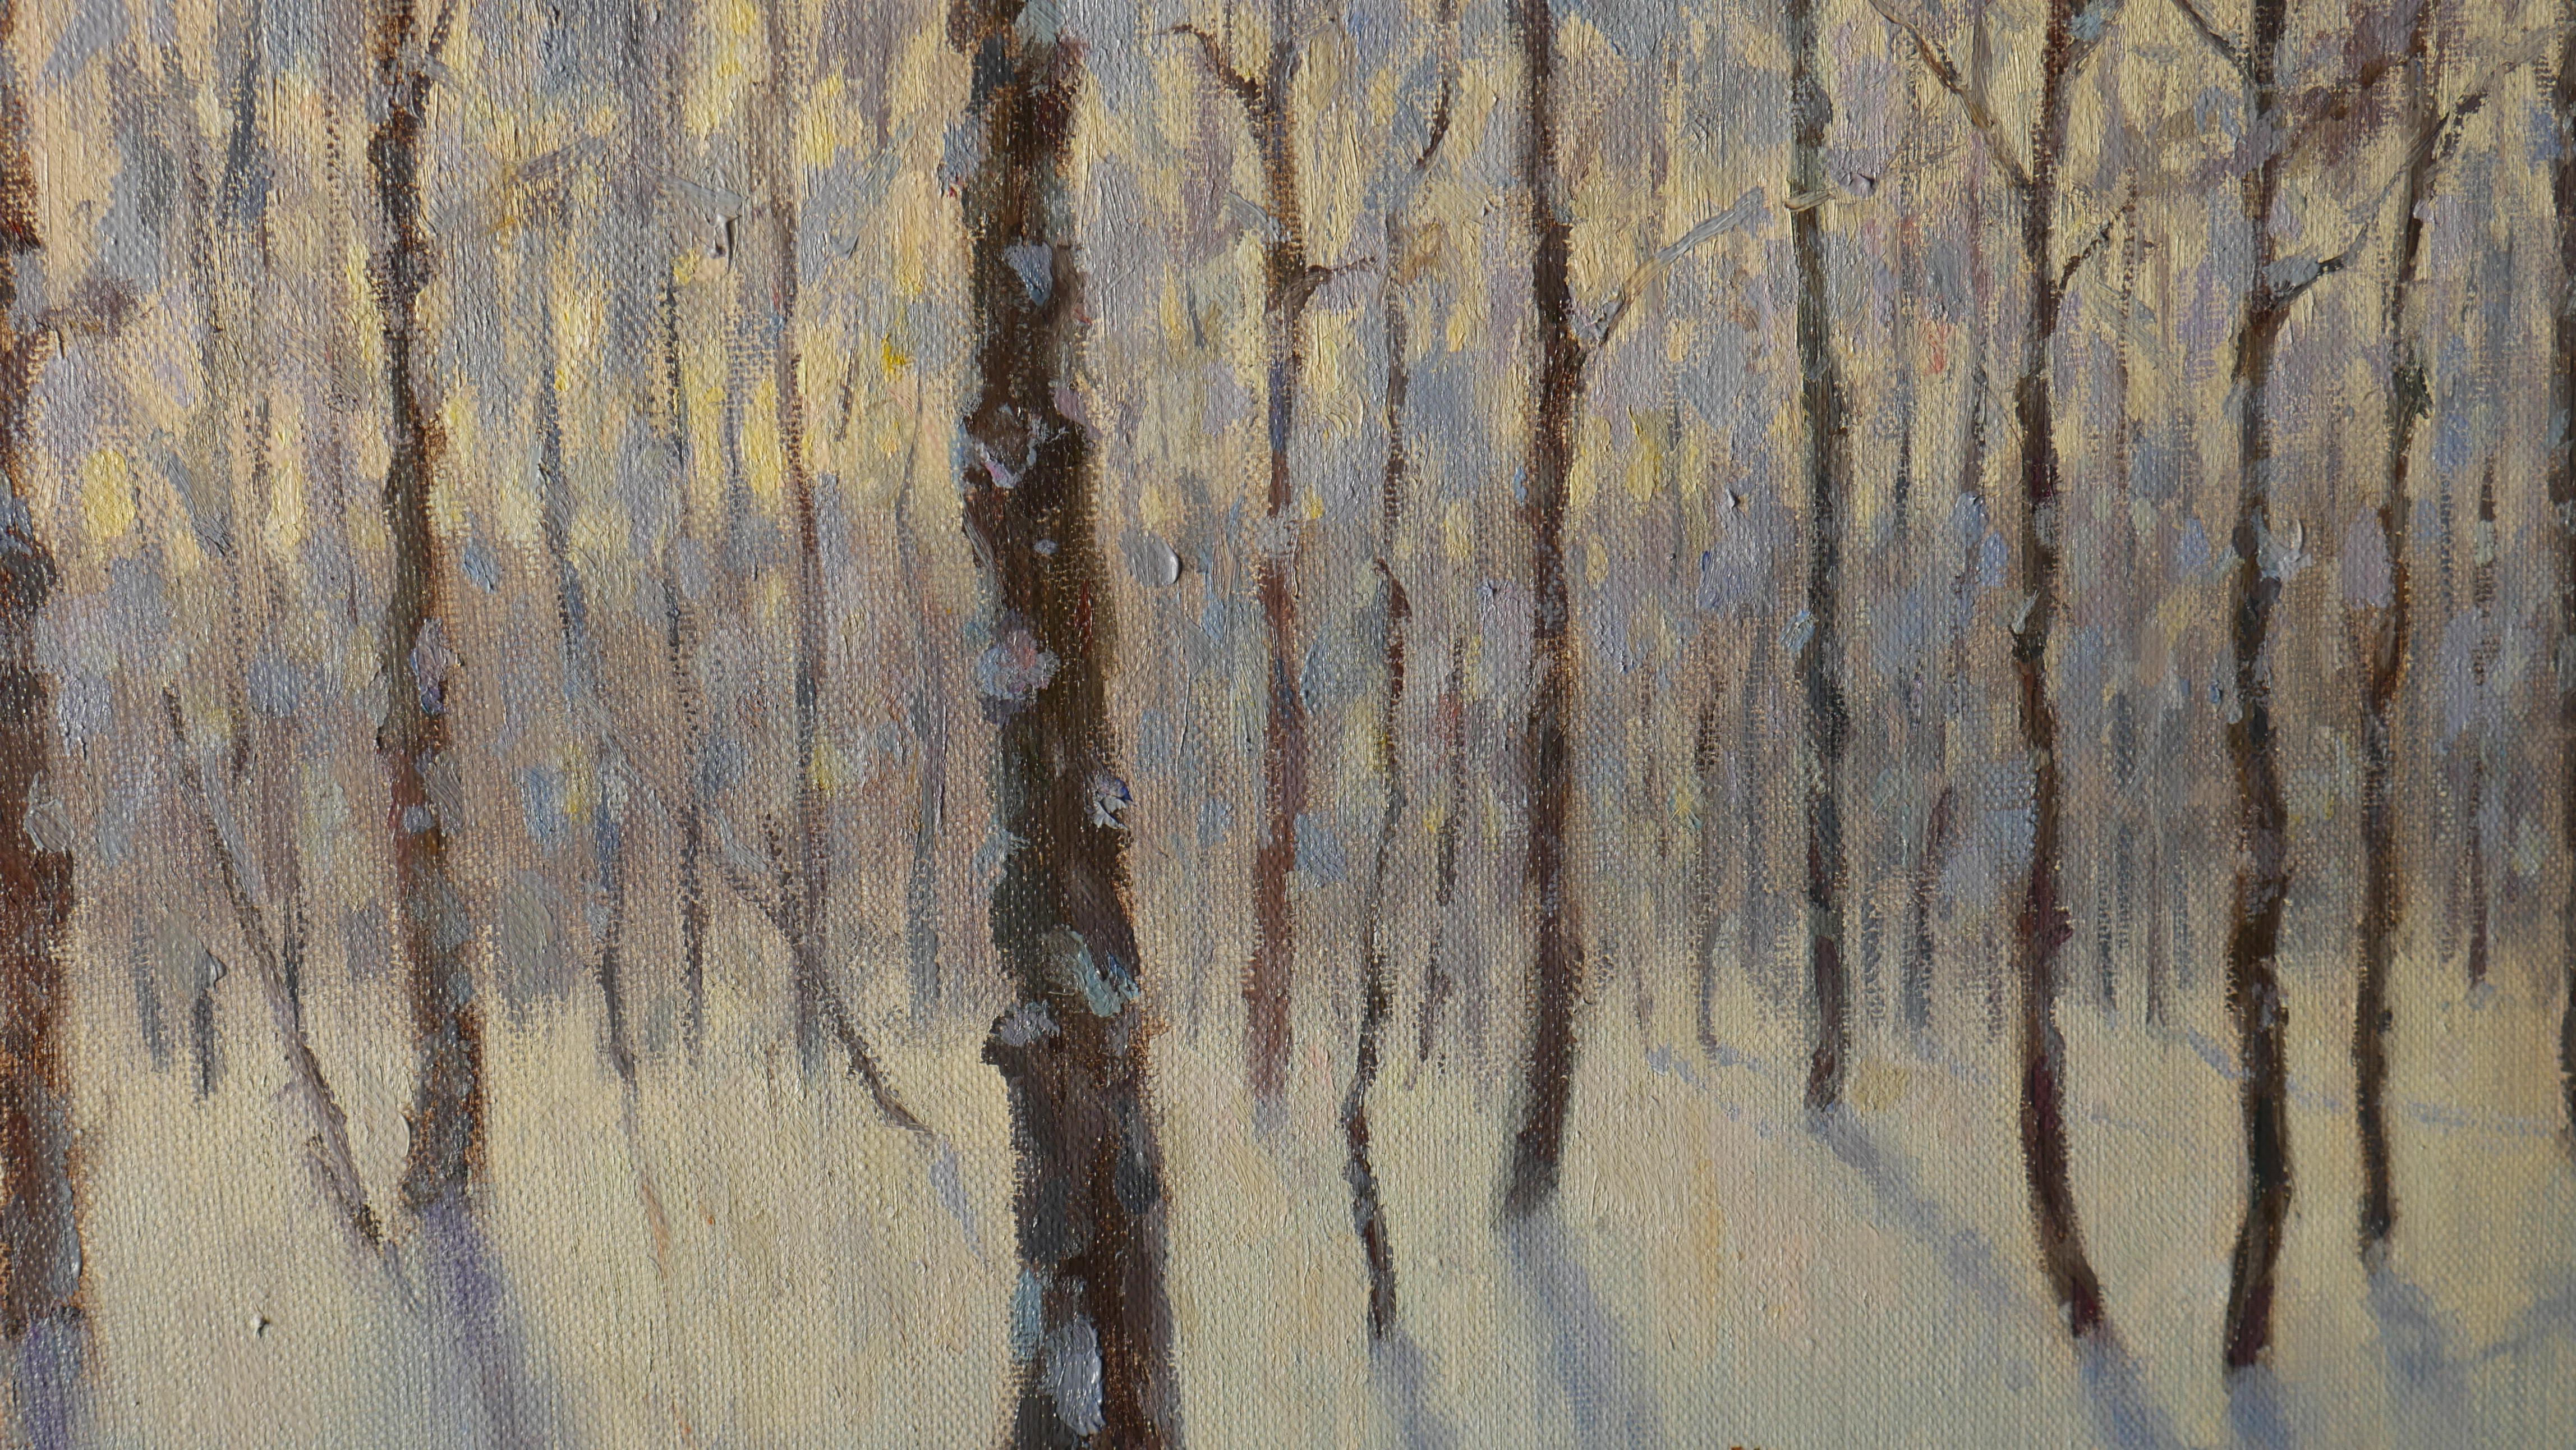 The Frosty Morning At The Forest Edge - winter landscape painting 1